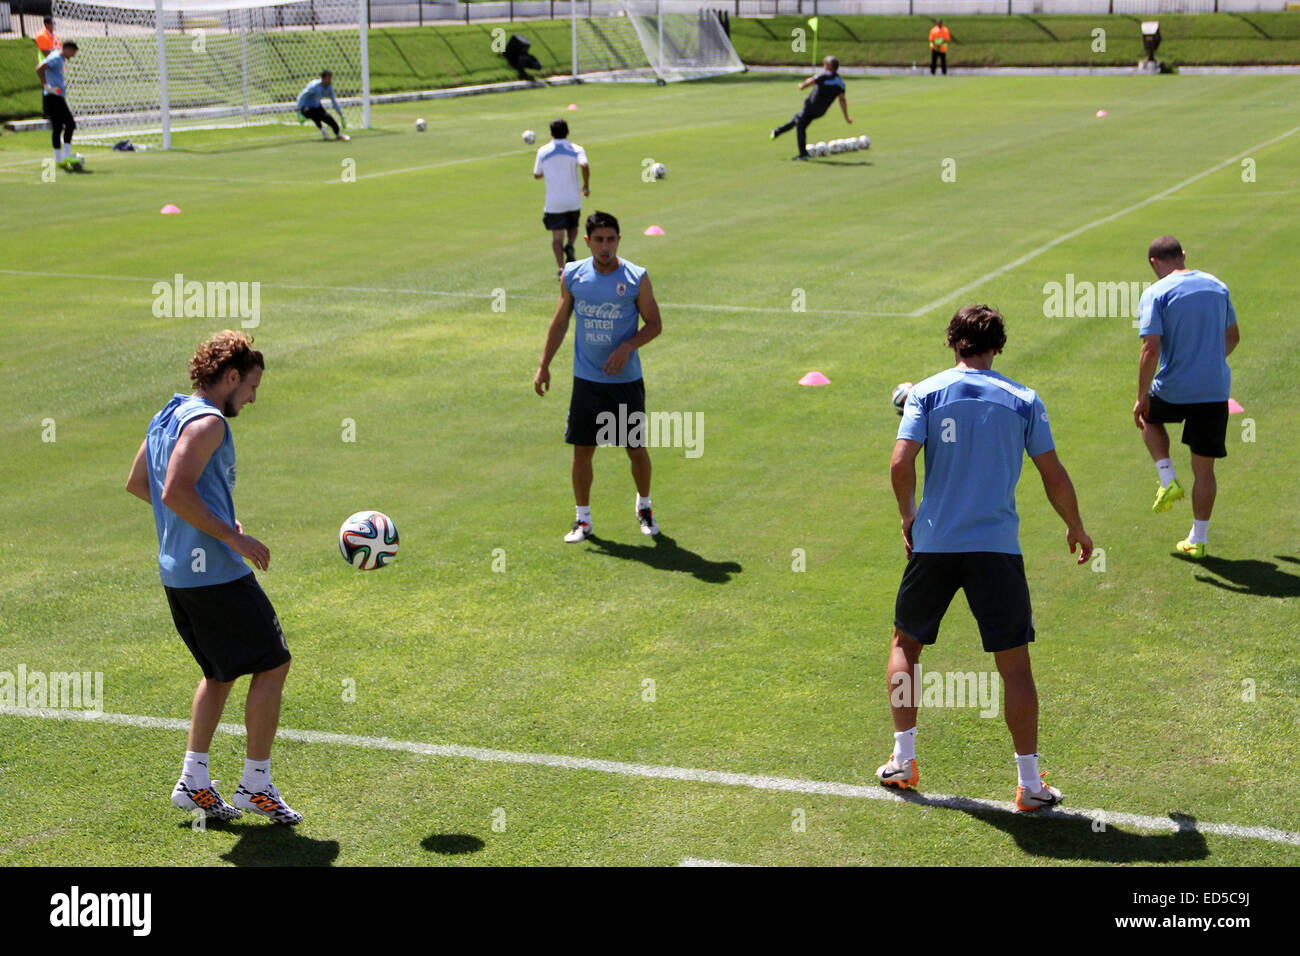 2014 FIFA World Cup - Uruguay national football team training held at Frasqueirao Stadium, following their win against Italy yesterday (24Jun14).  Featuring: Diego Forlan,Jorge Fucile Where: Natal, Brazil When: 25 Jun 2014 Stock Photo